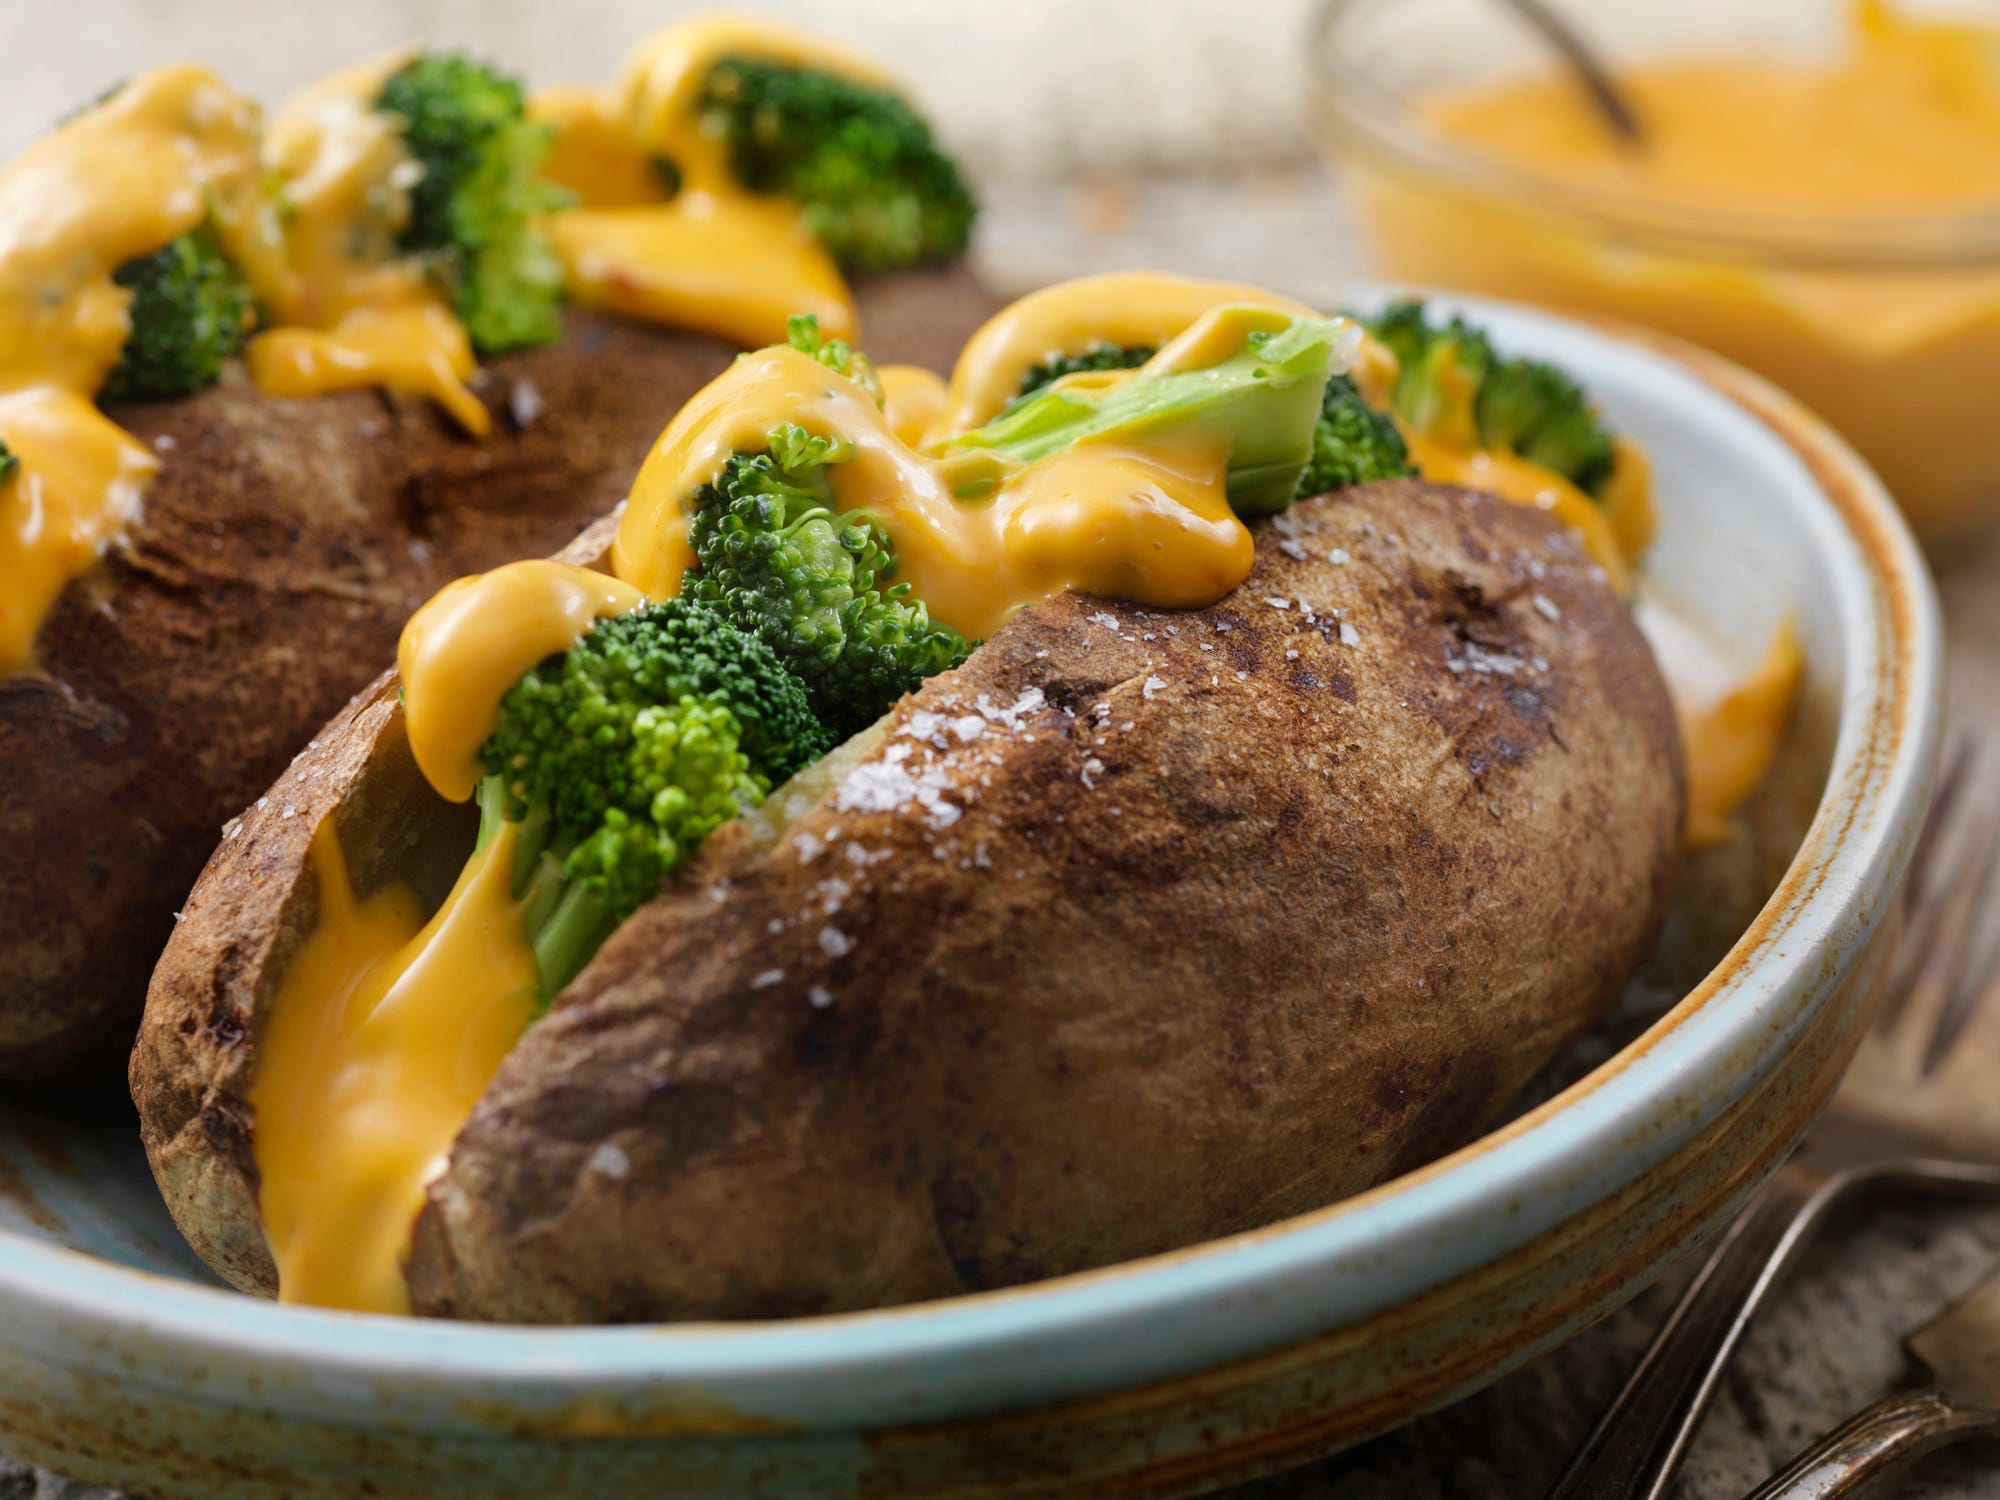 A baked potato sliced open and stuffed with broccoli and cheese sauce